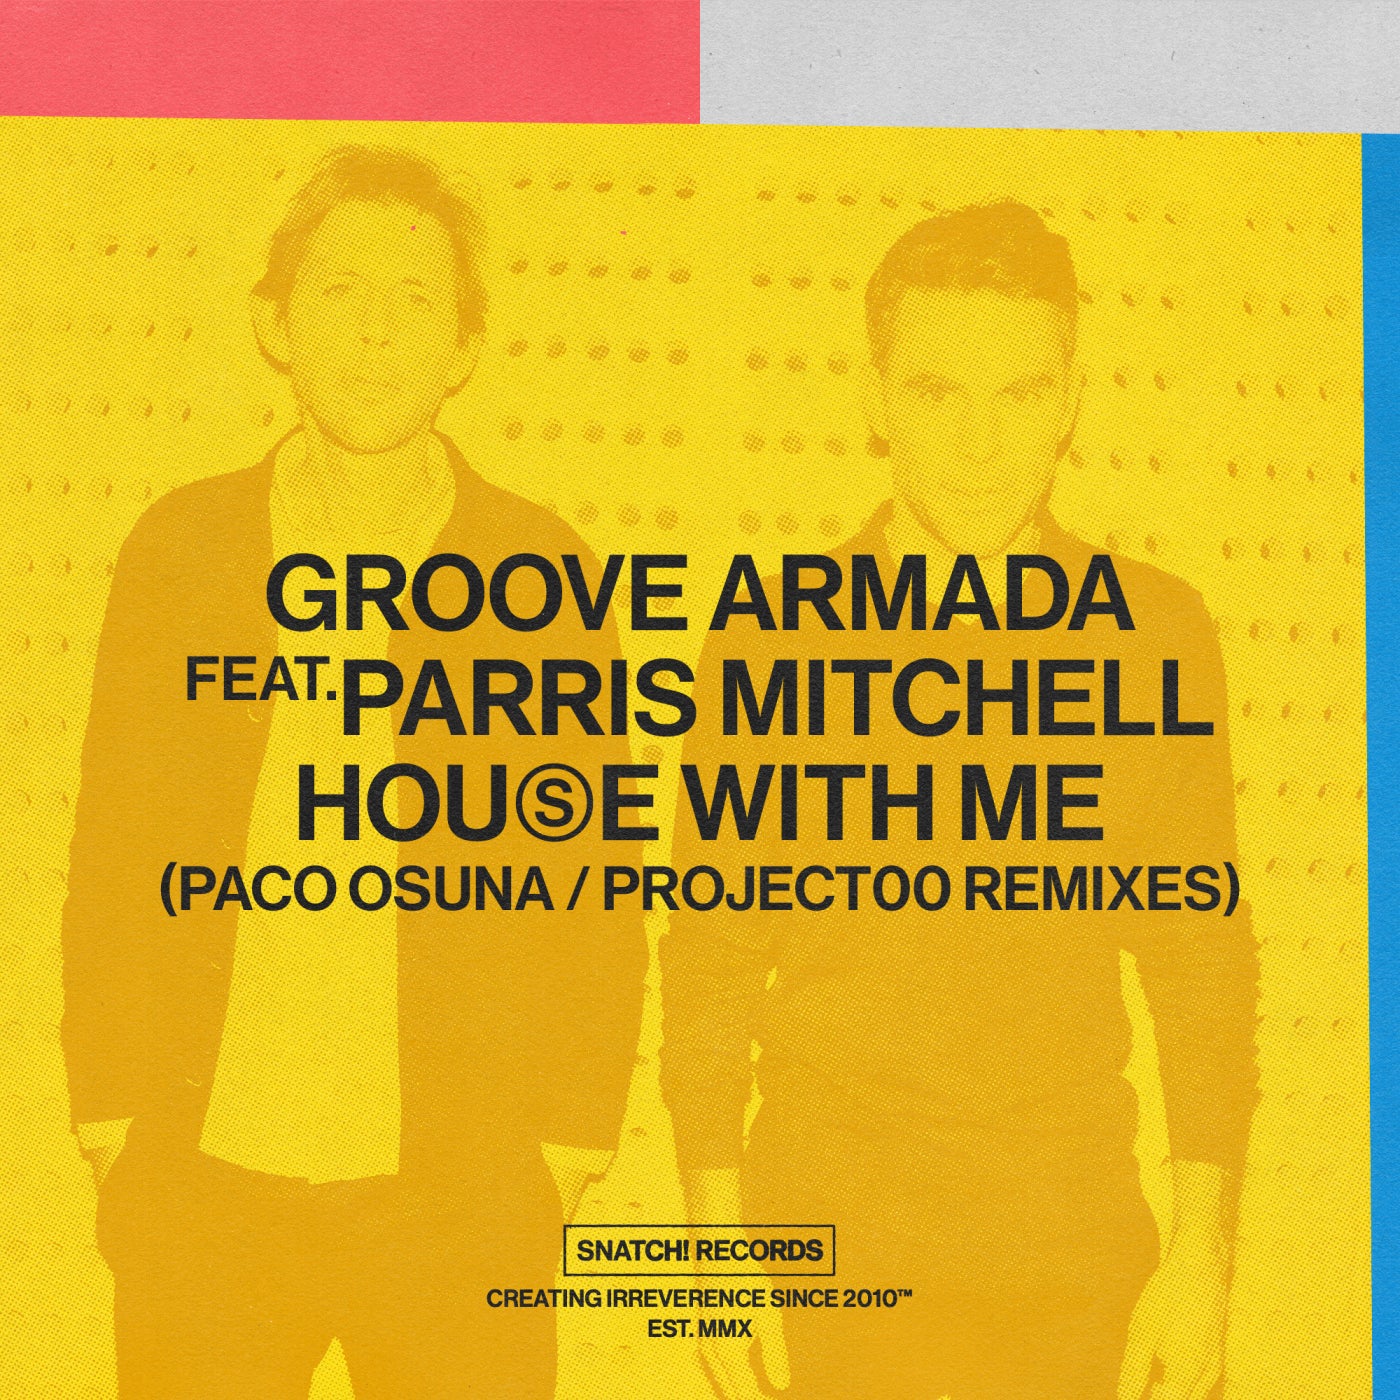 Groove Armada, Parris Mitchell - House With Me (Paco Osuna / Project00 Remixes) [SNATCH161]